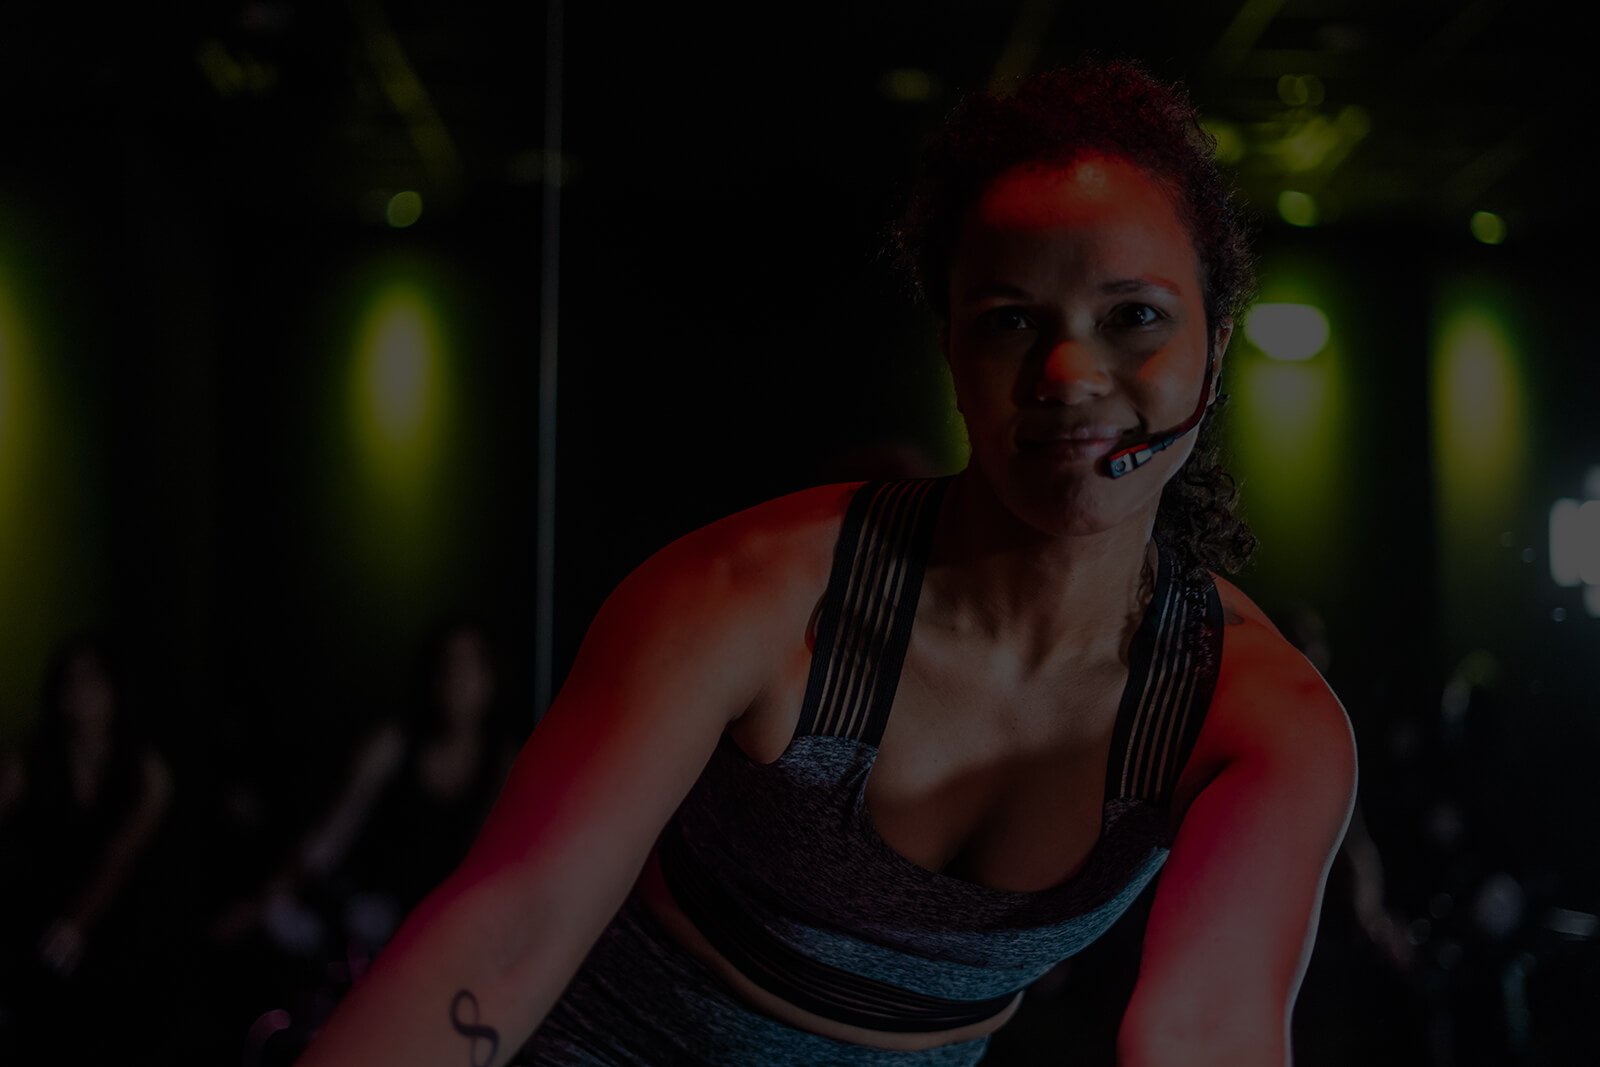 CycleBar instructor smiling